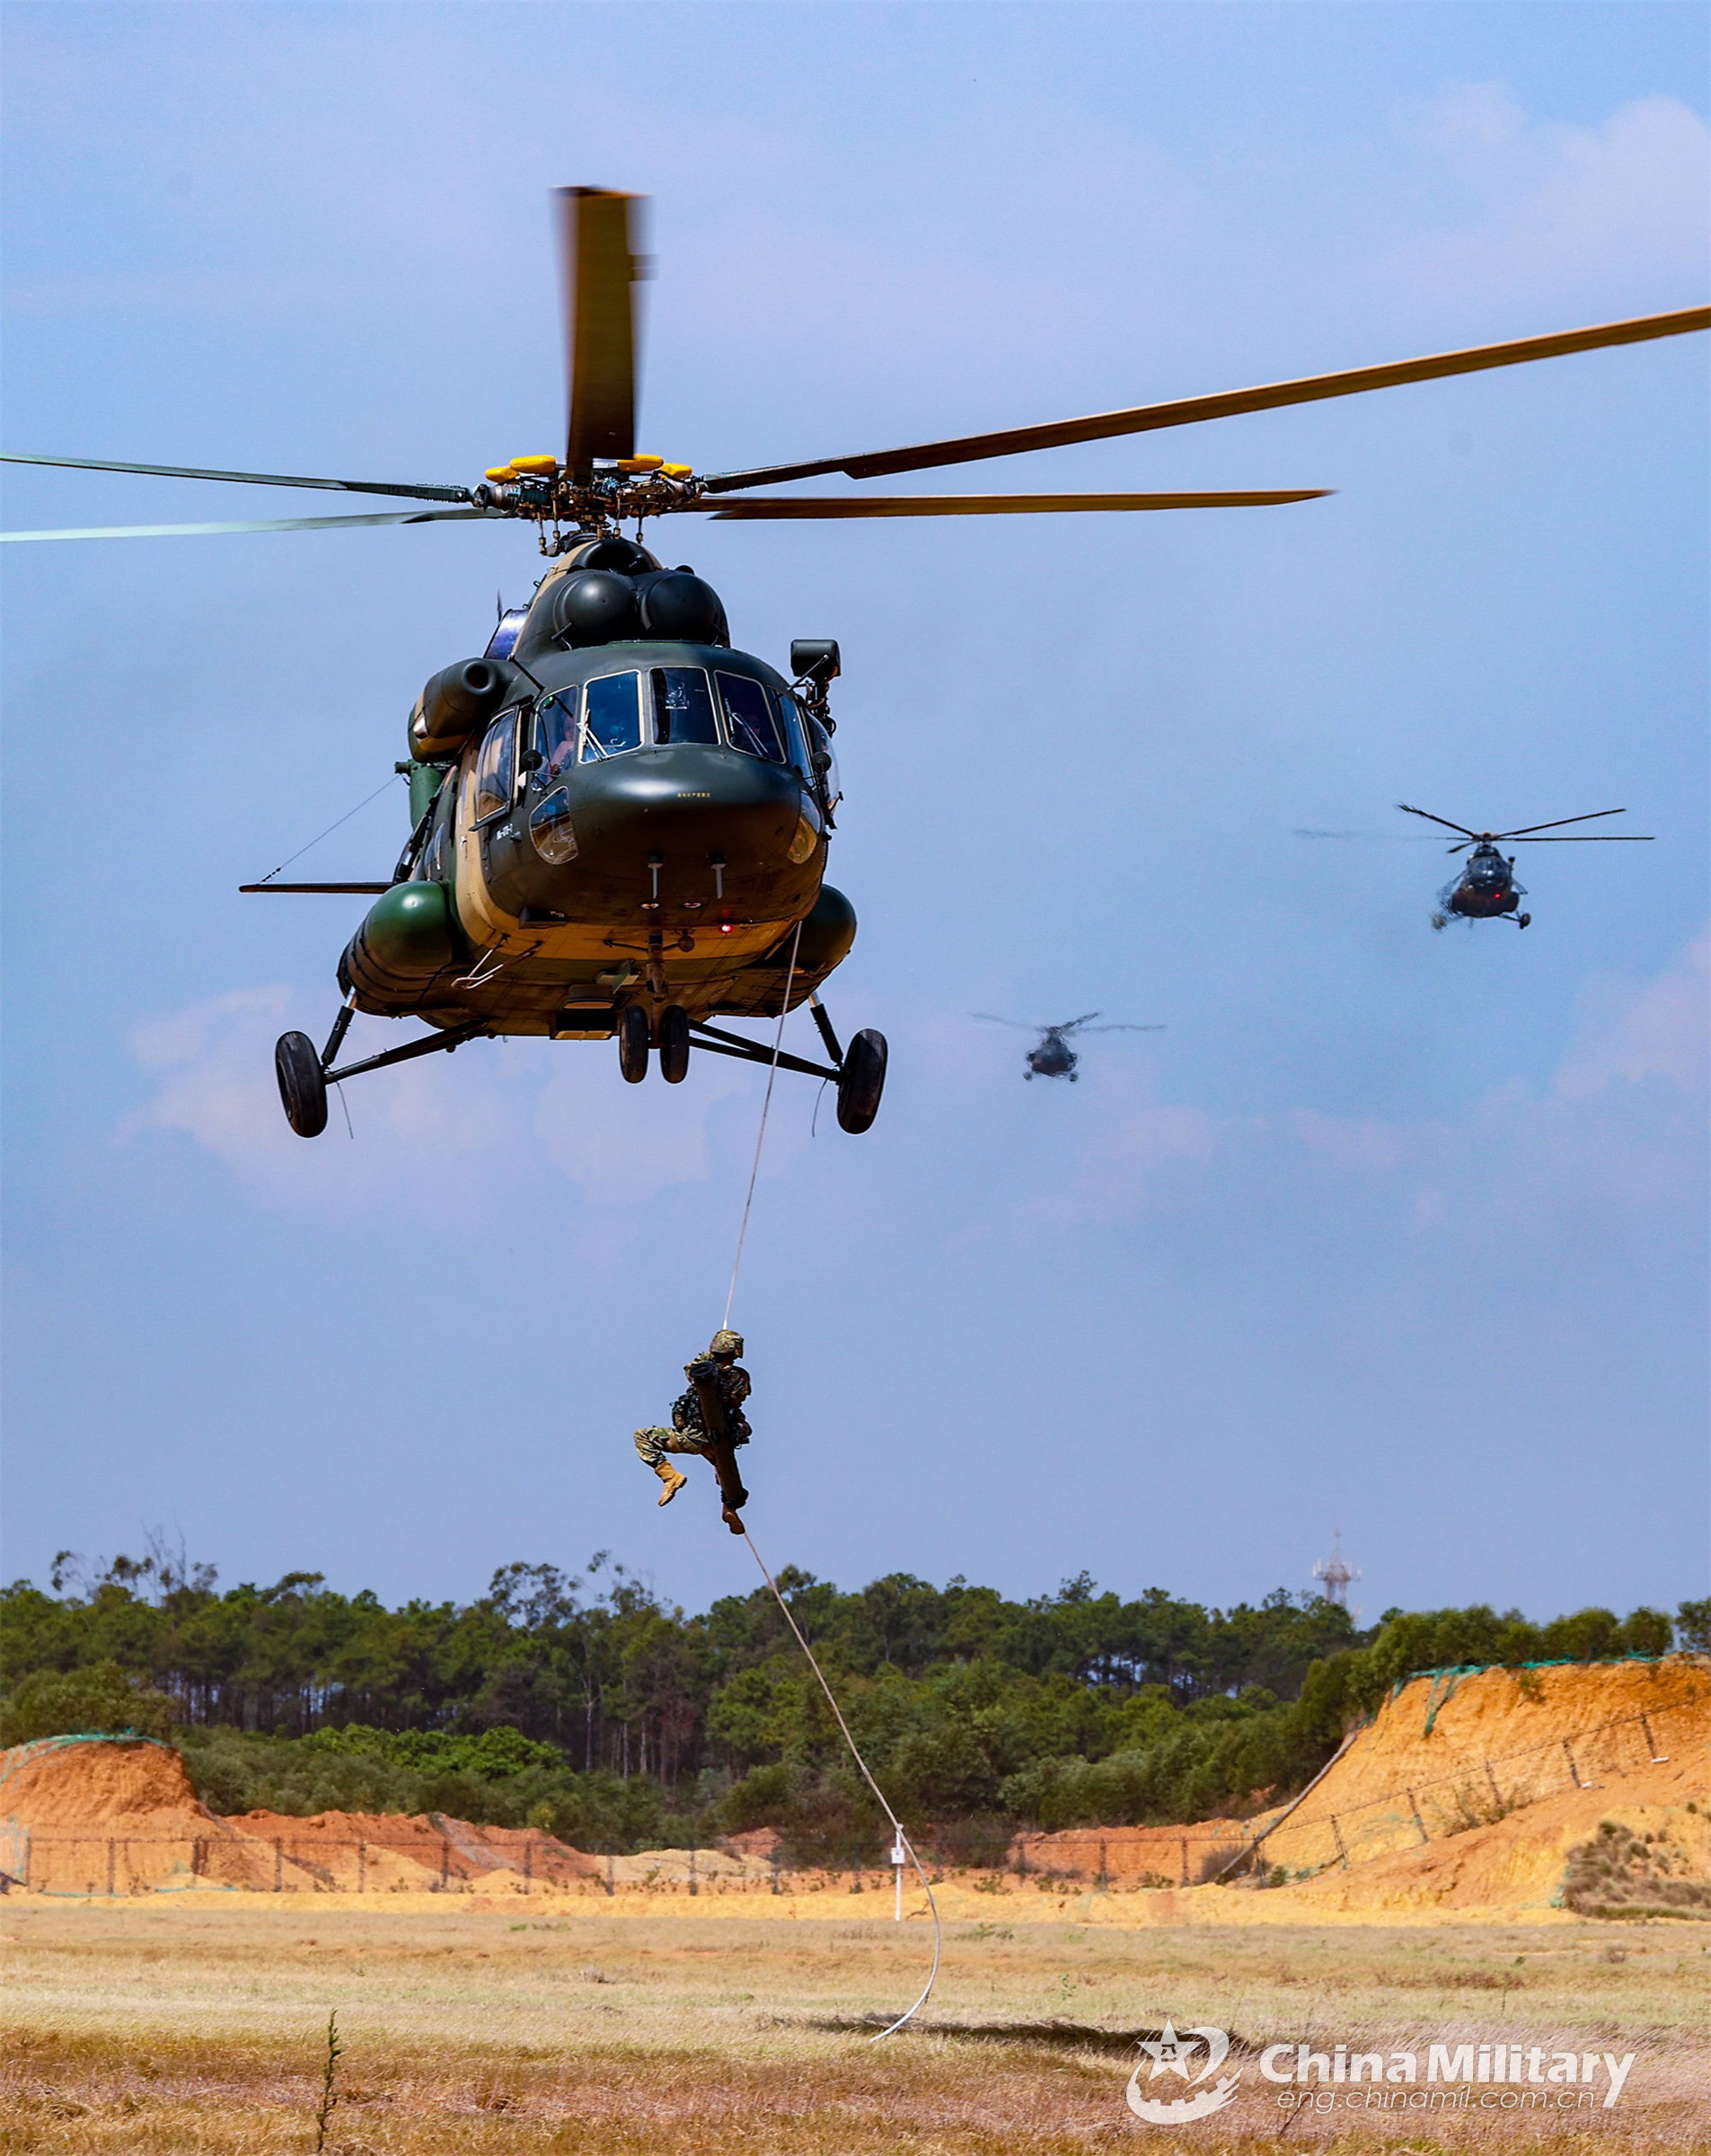 Soldiers fast-rope from transport helicopters - Photos China